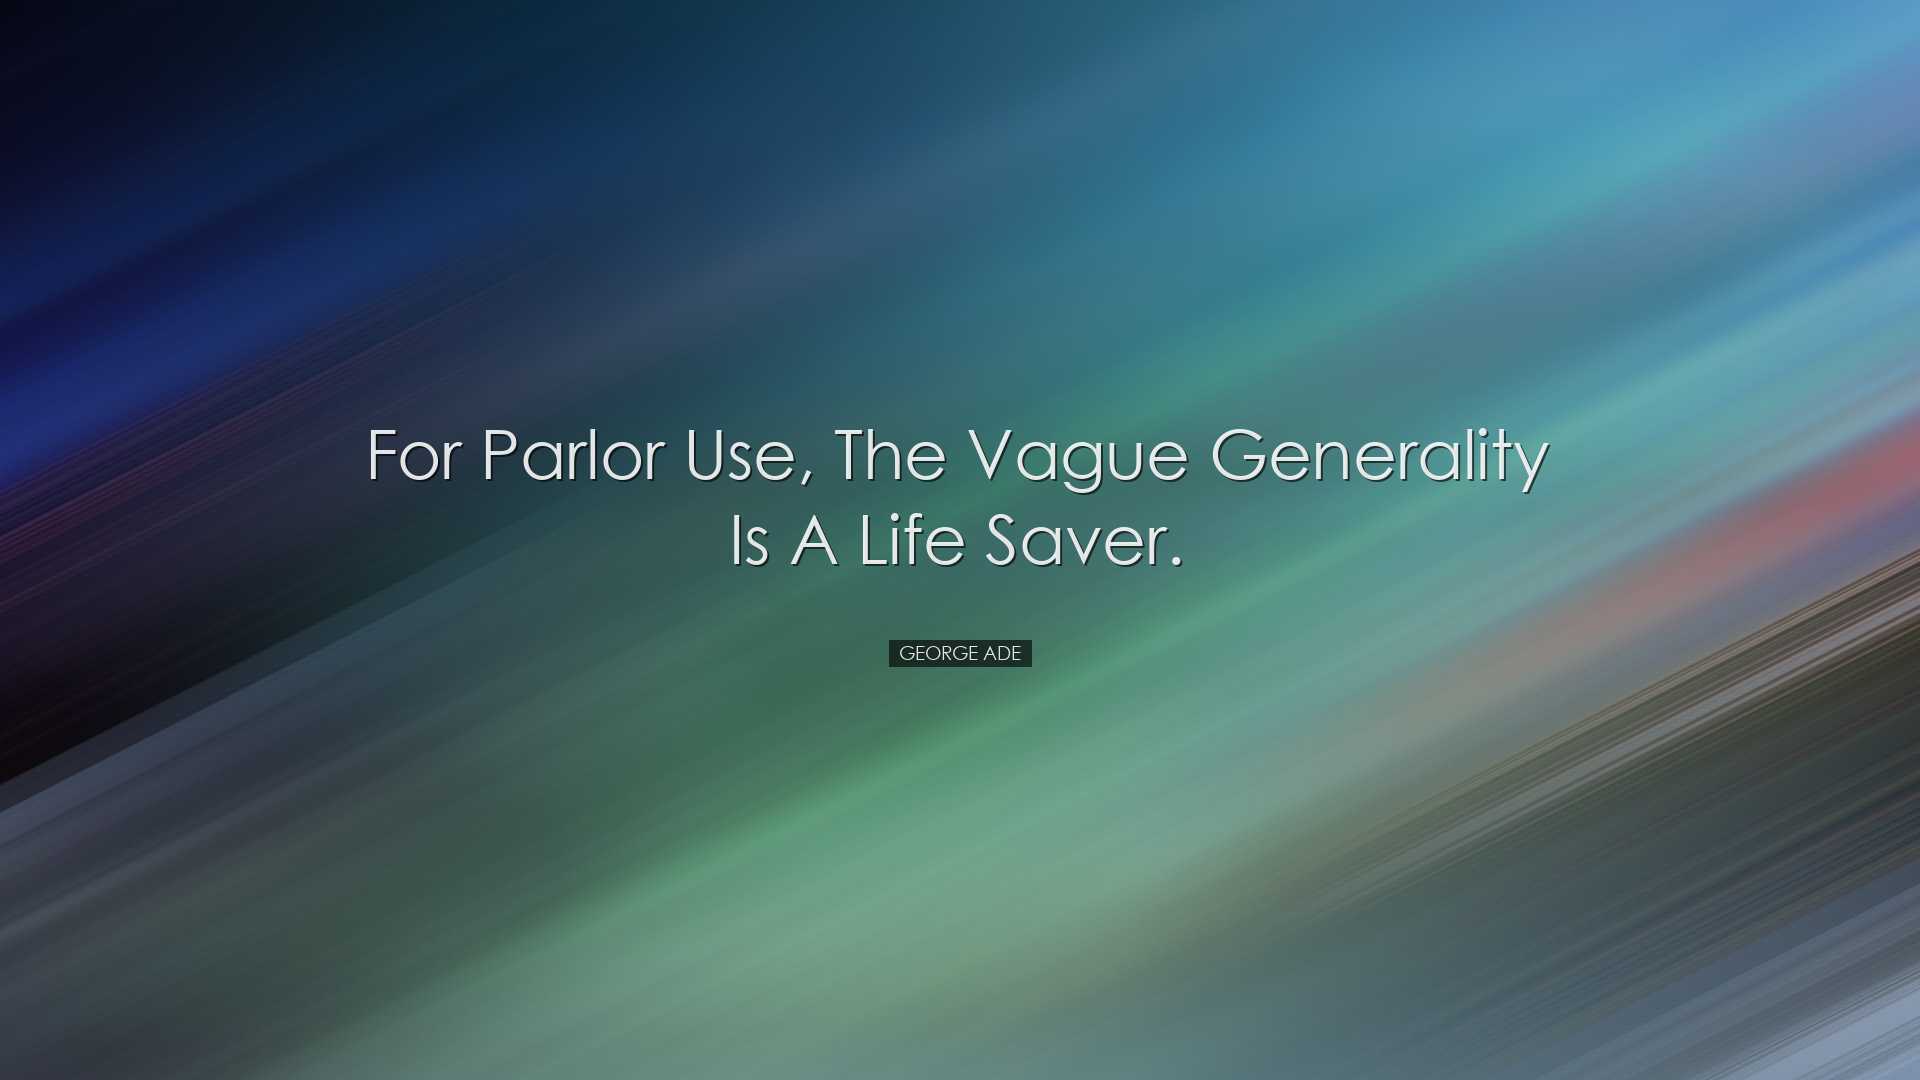 For parlor use, the vague generality is a life saver. - George Ade